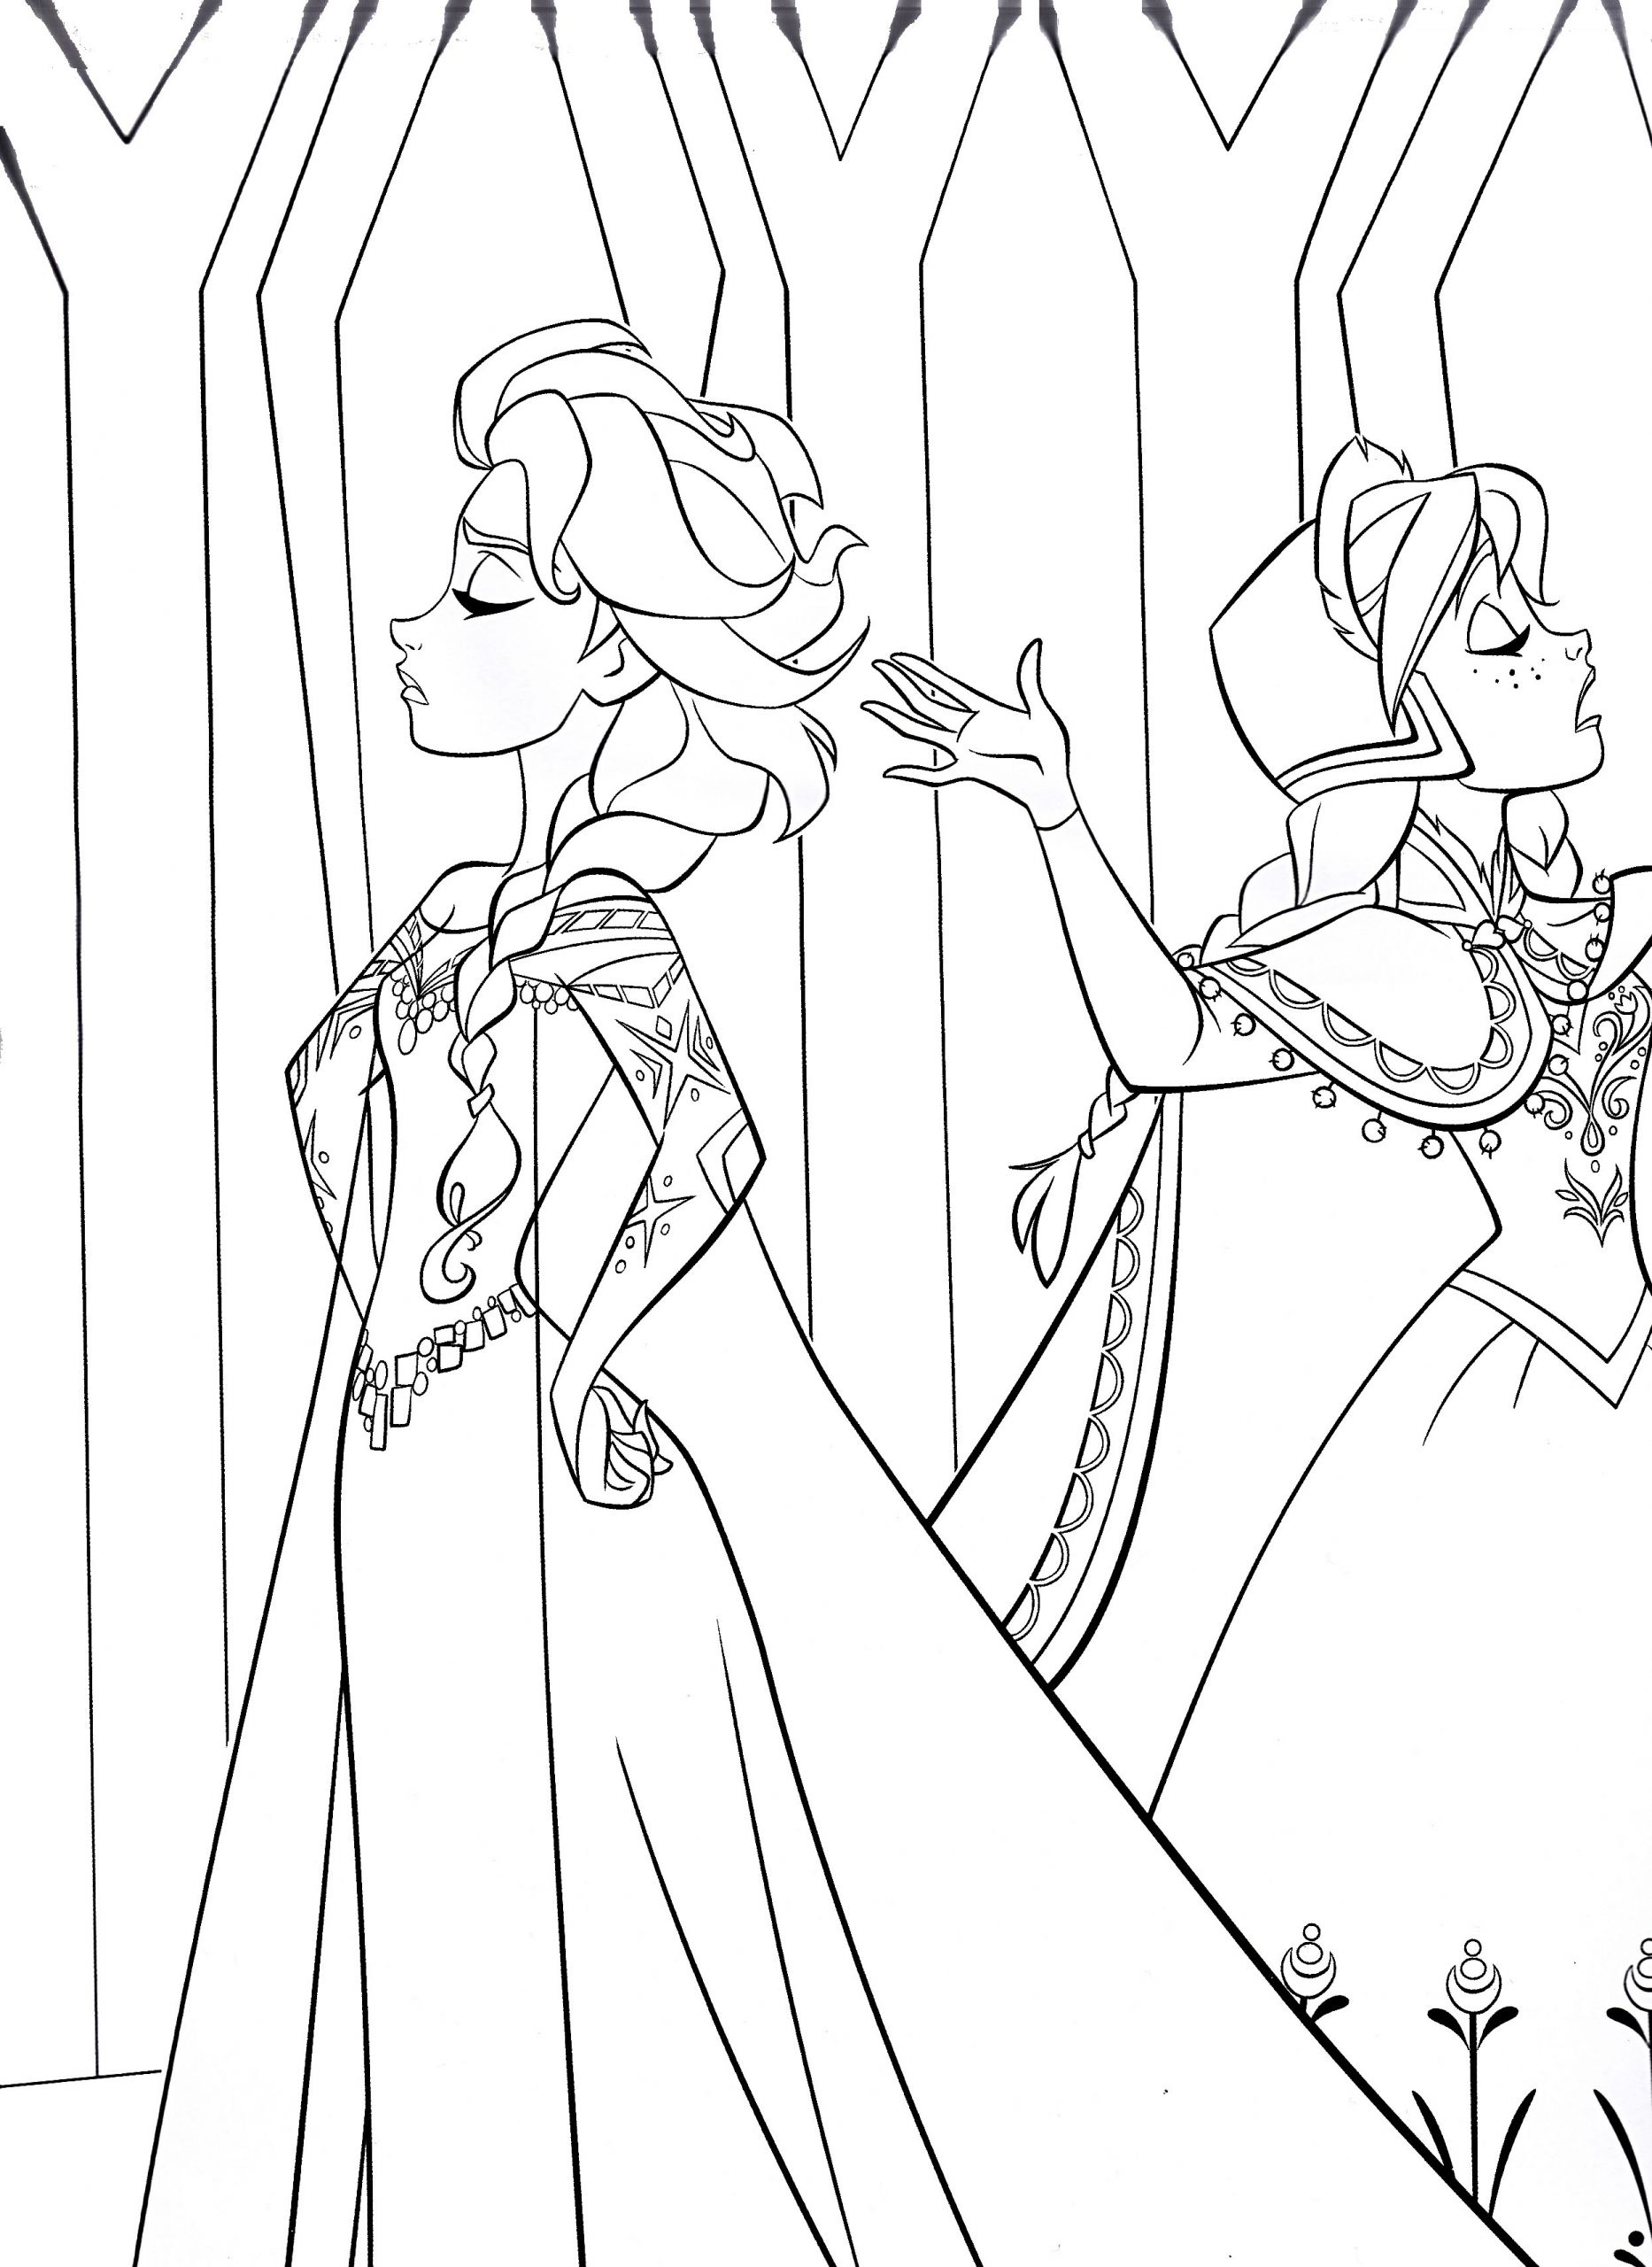 Frozen Coloring Pages For Kids
 Free Printable Frozen Coloring Pages for Kids Best